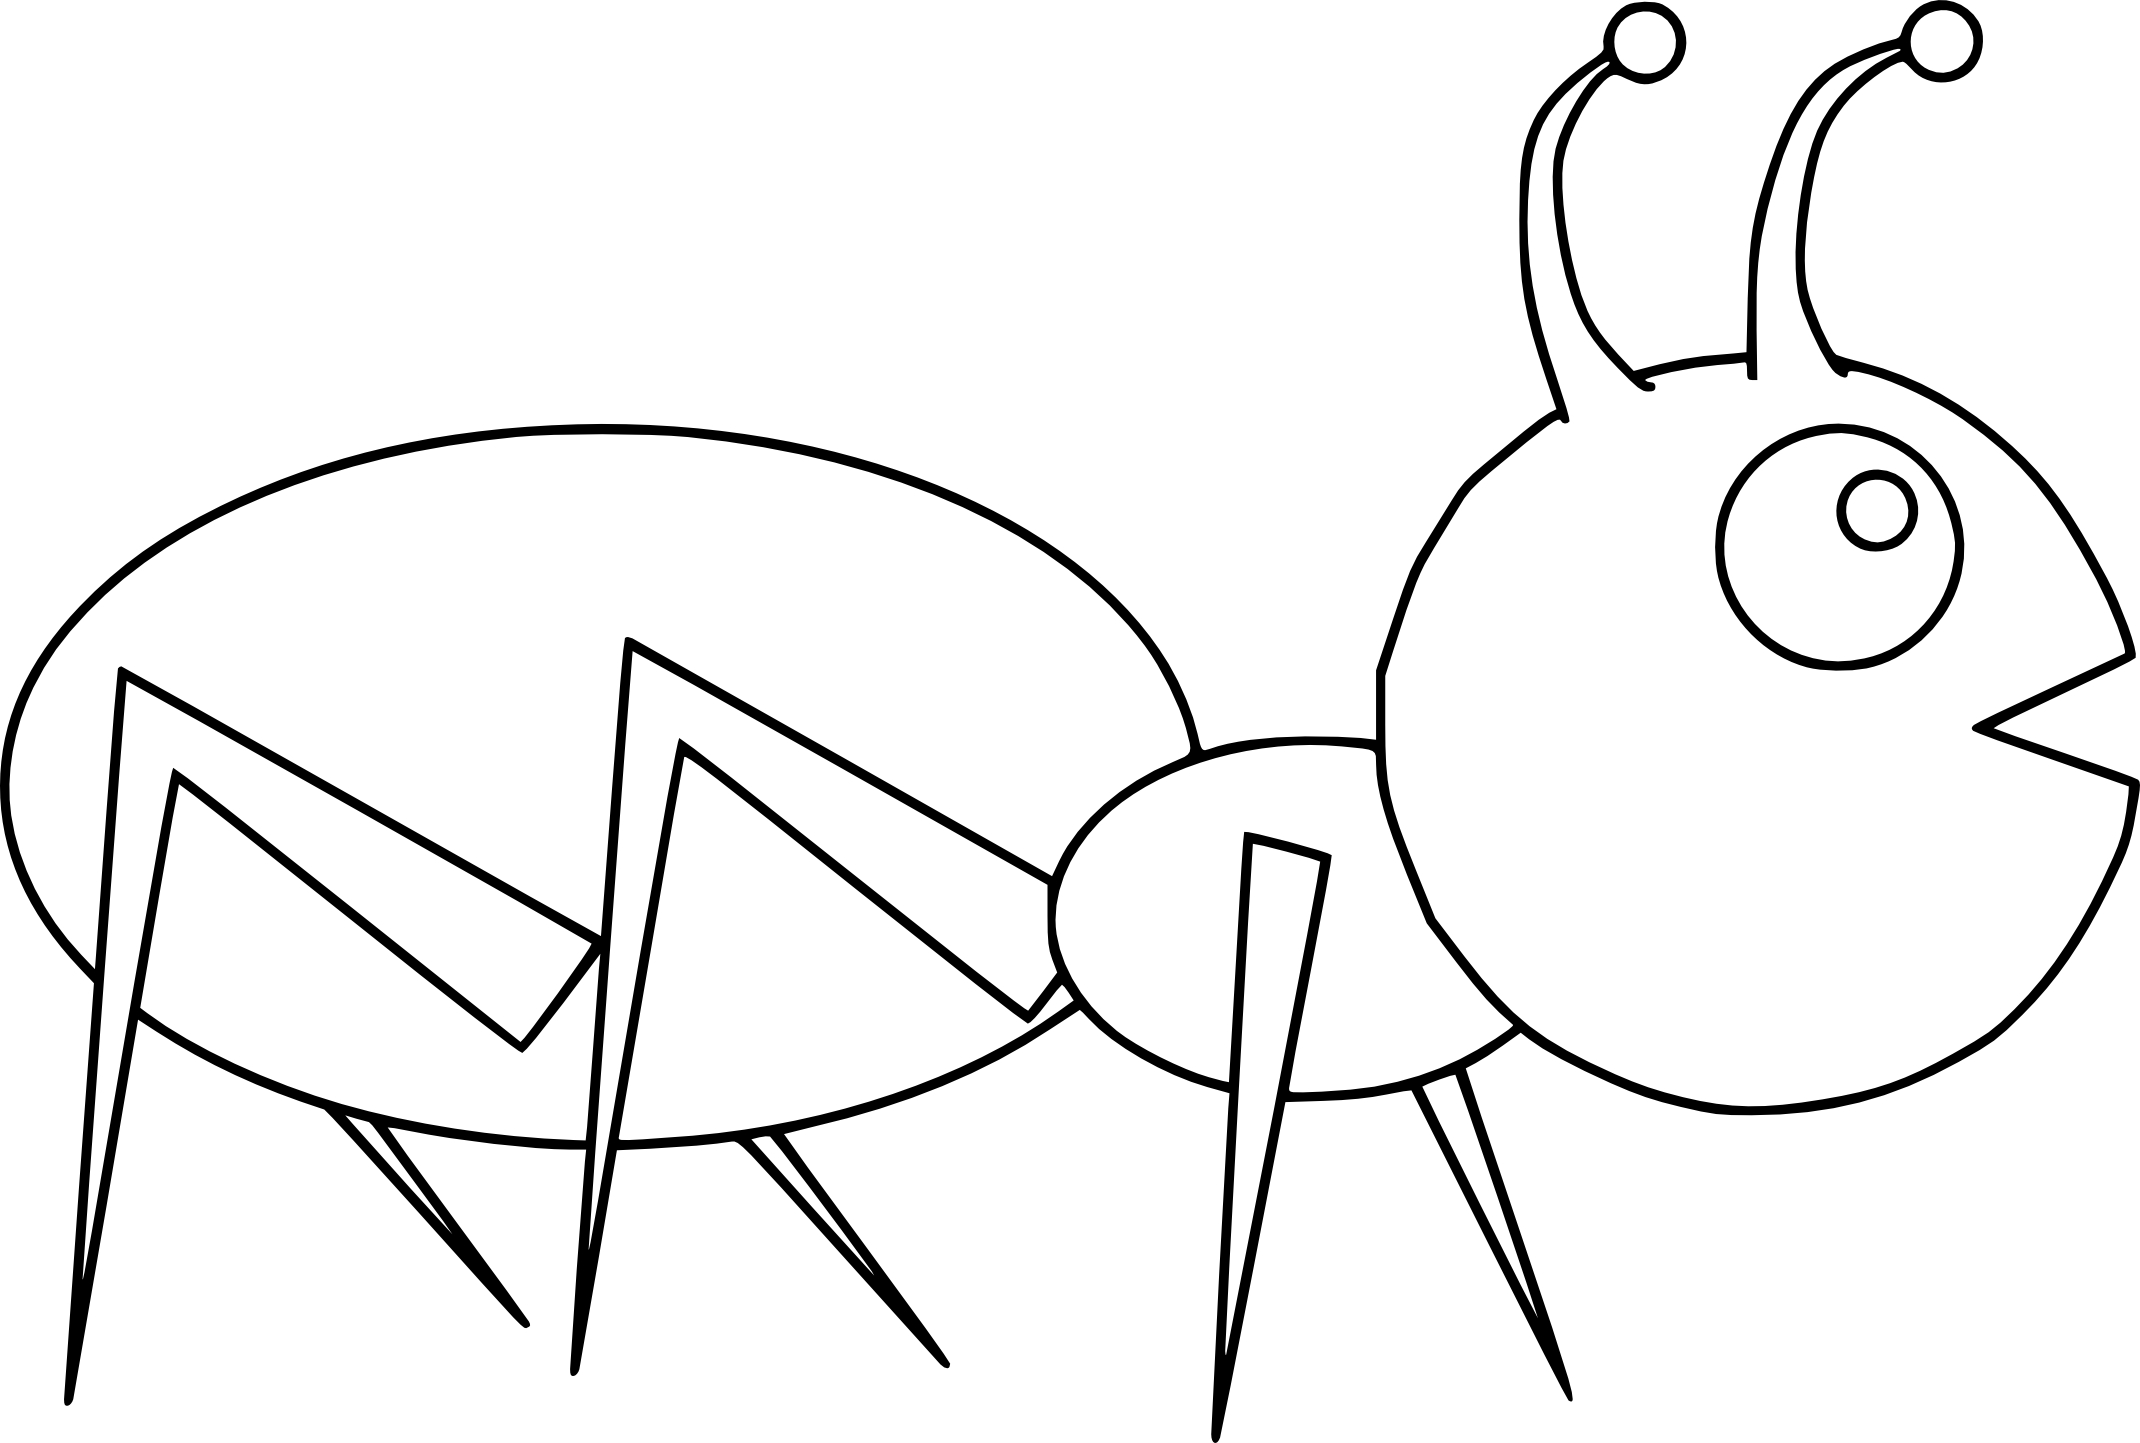 Easy Ant coloring page